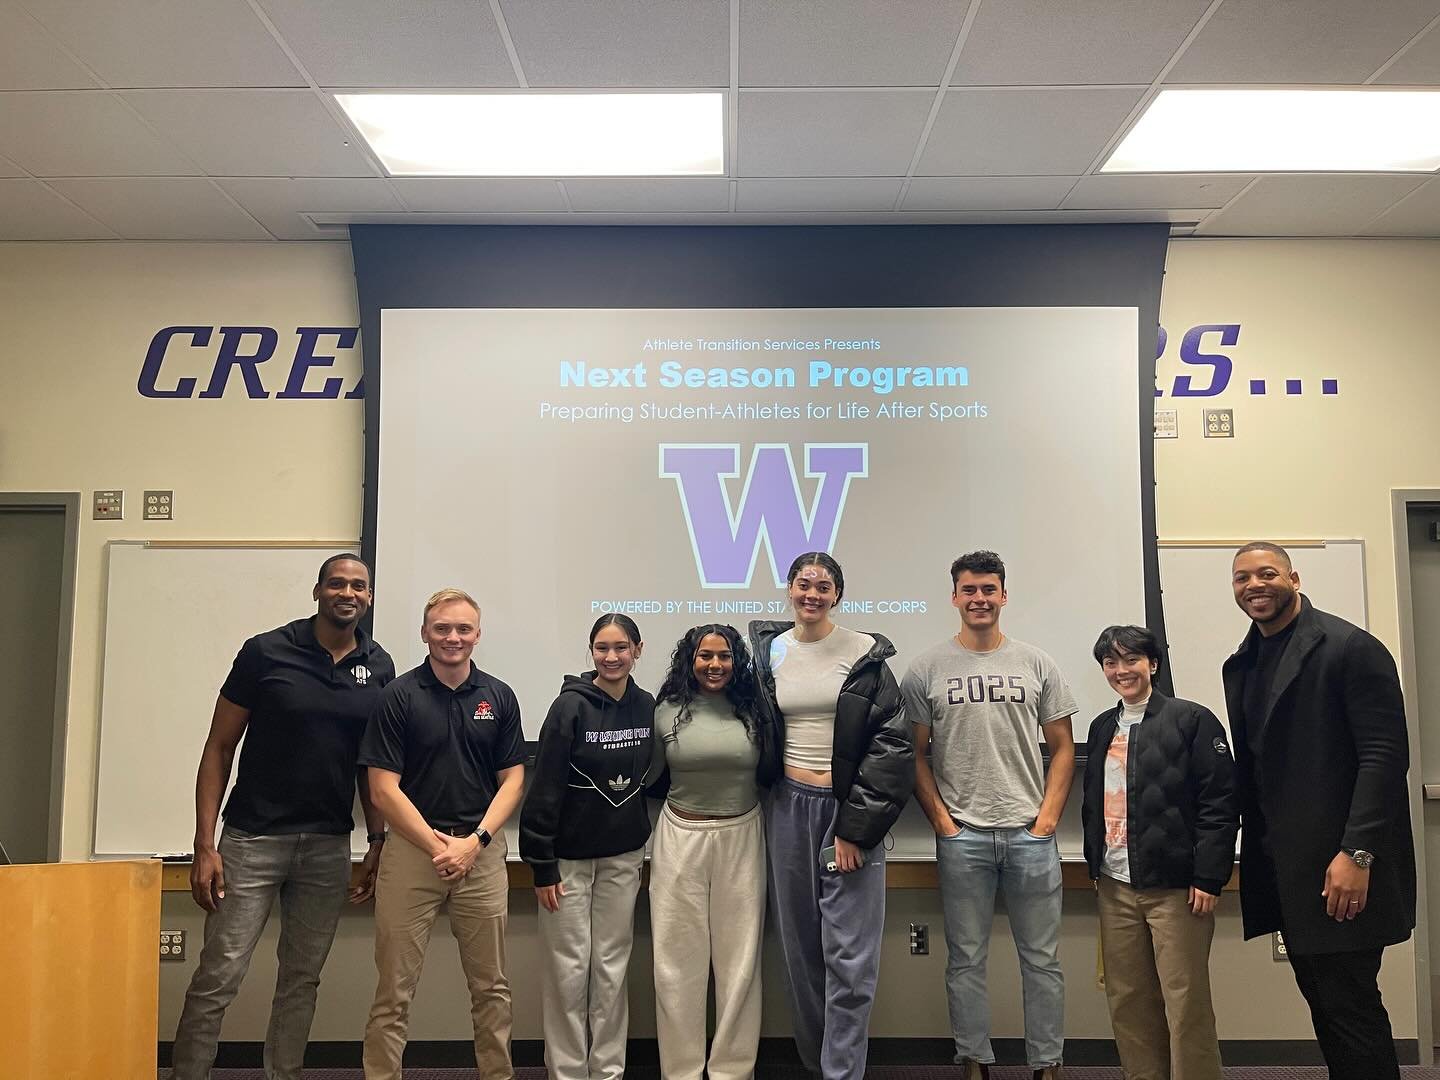 Big thanks to @UWAthletics and @SDCoyotes having ATS back recently. It was great  to play a part in the awesome work taking place to support the growth and development of your student-athletes.